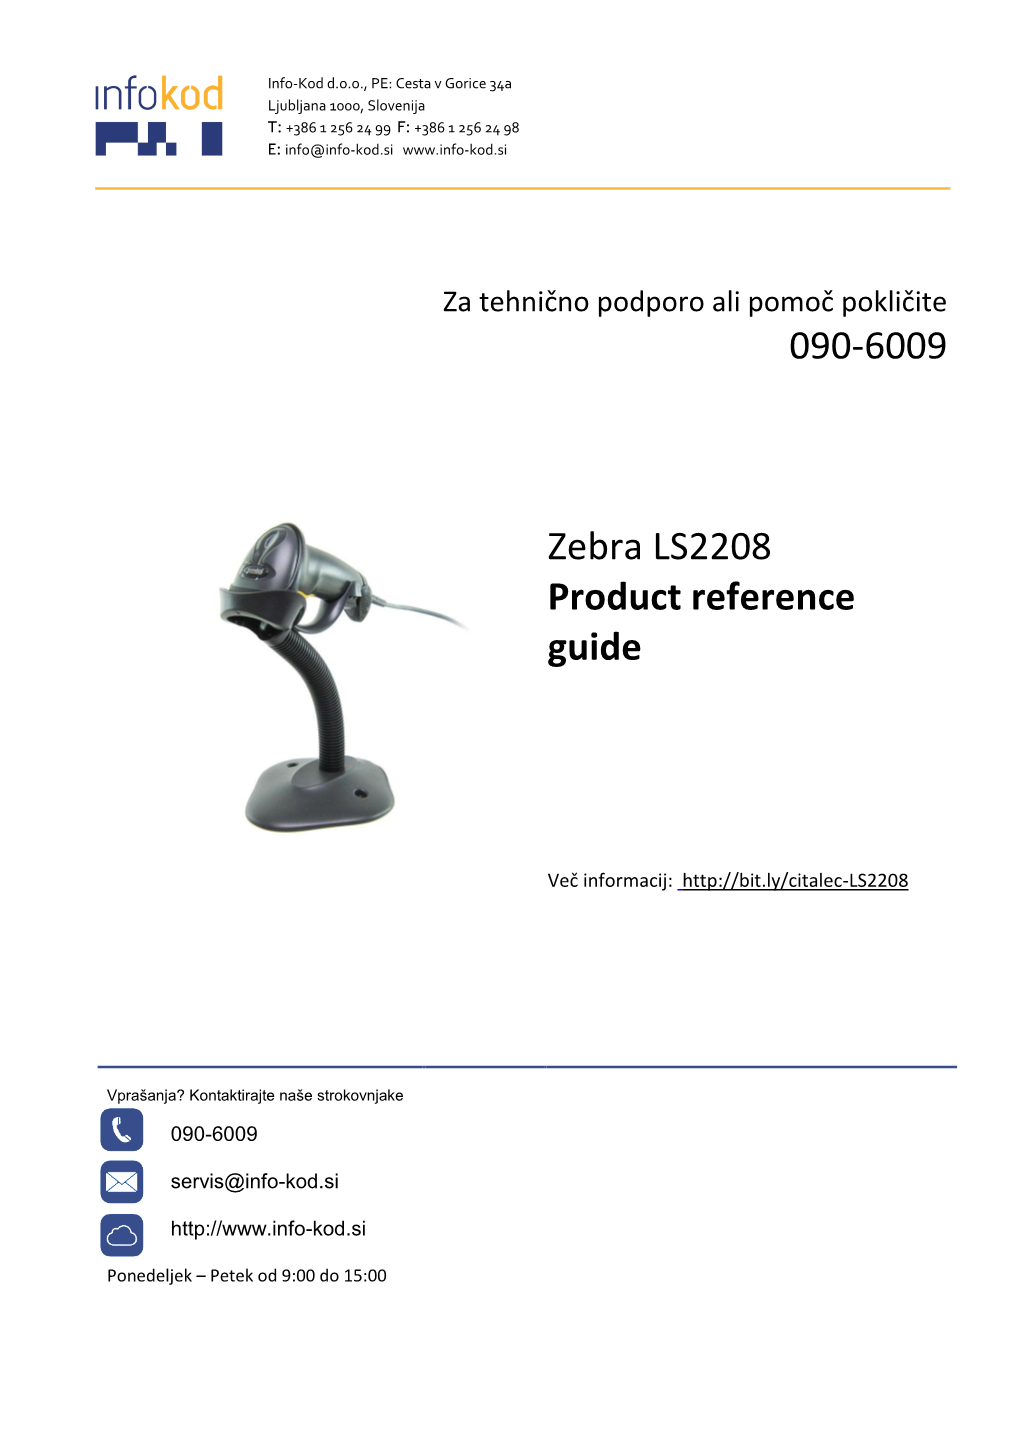 090-6009 Zebra LS2208 Product Reference Guide